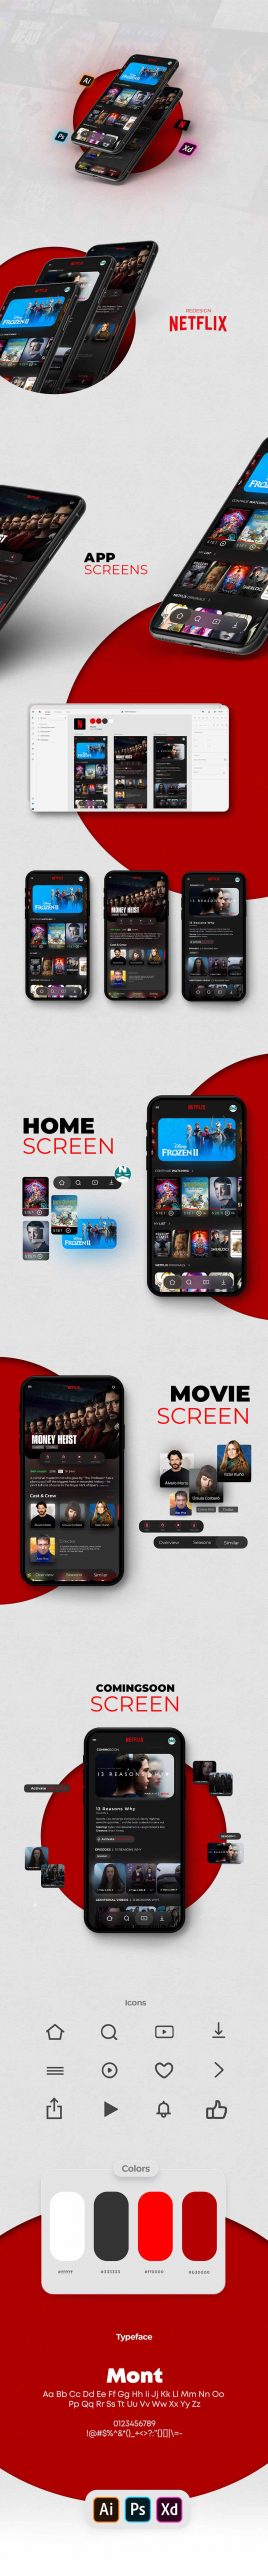 netflix-app-ui-redesign-freebie-download-free-resource-for-project